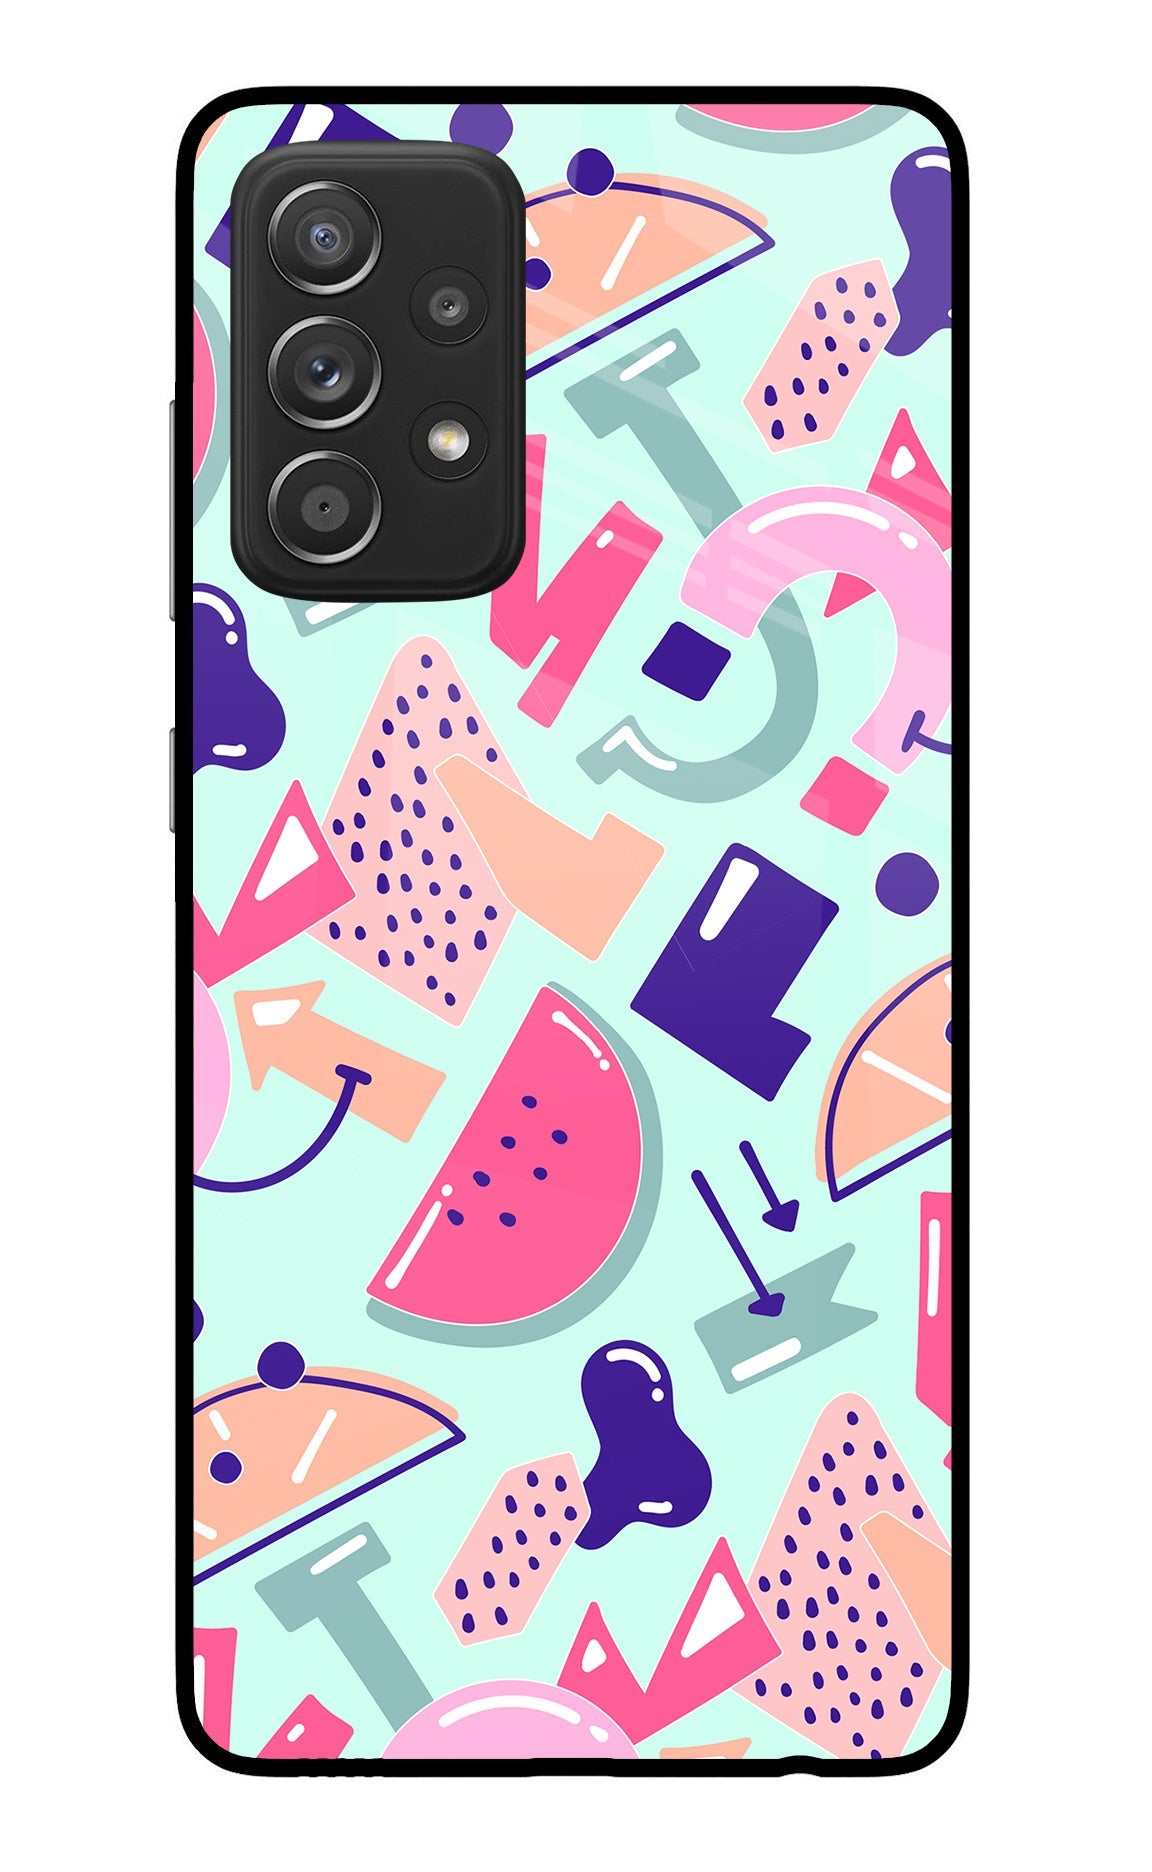 Doodle Pattern Samsung A52/A52s 5G Back Cover